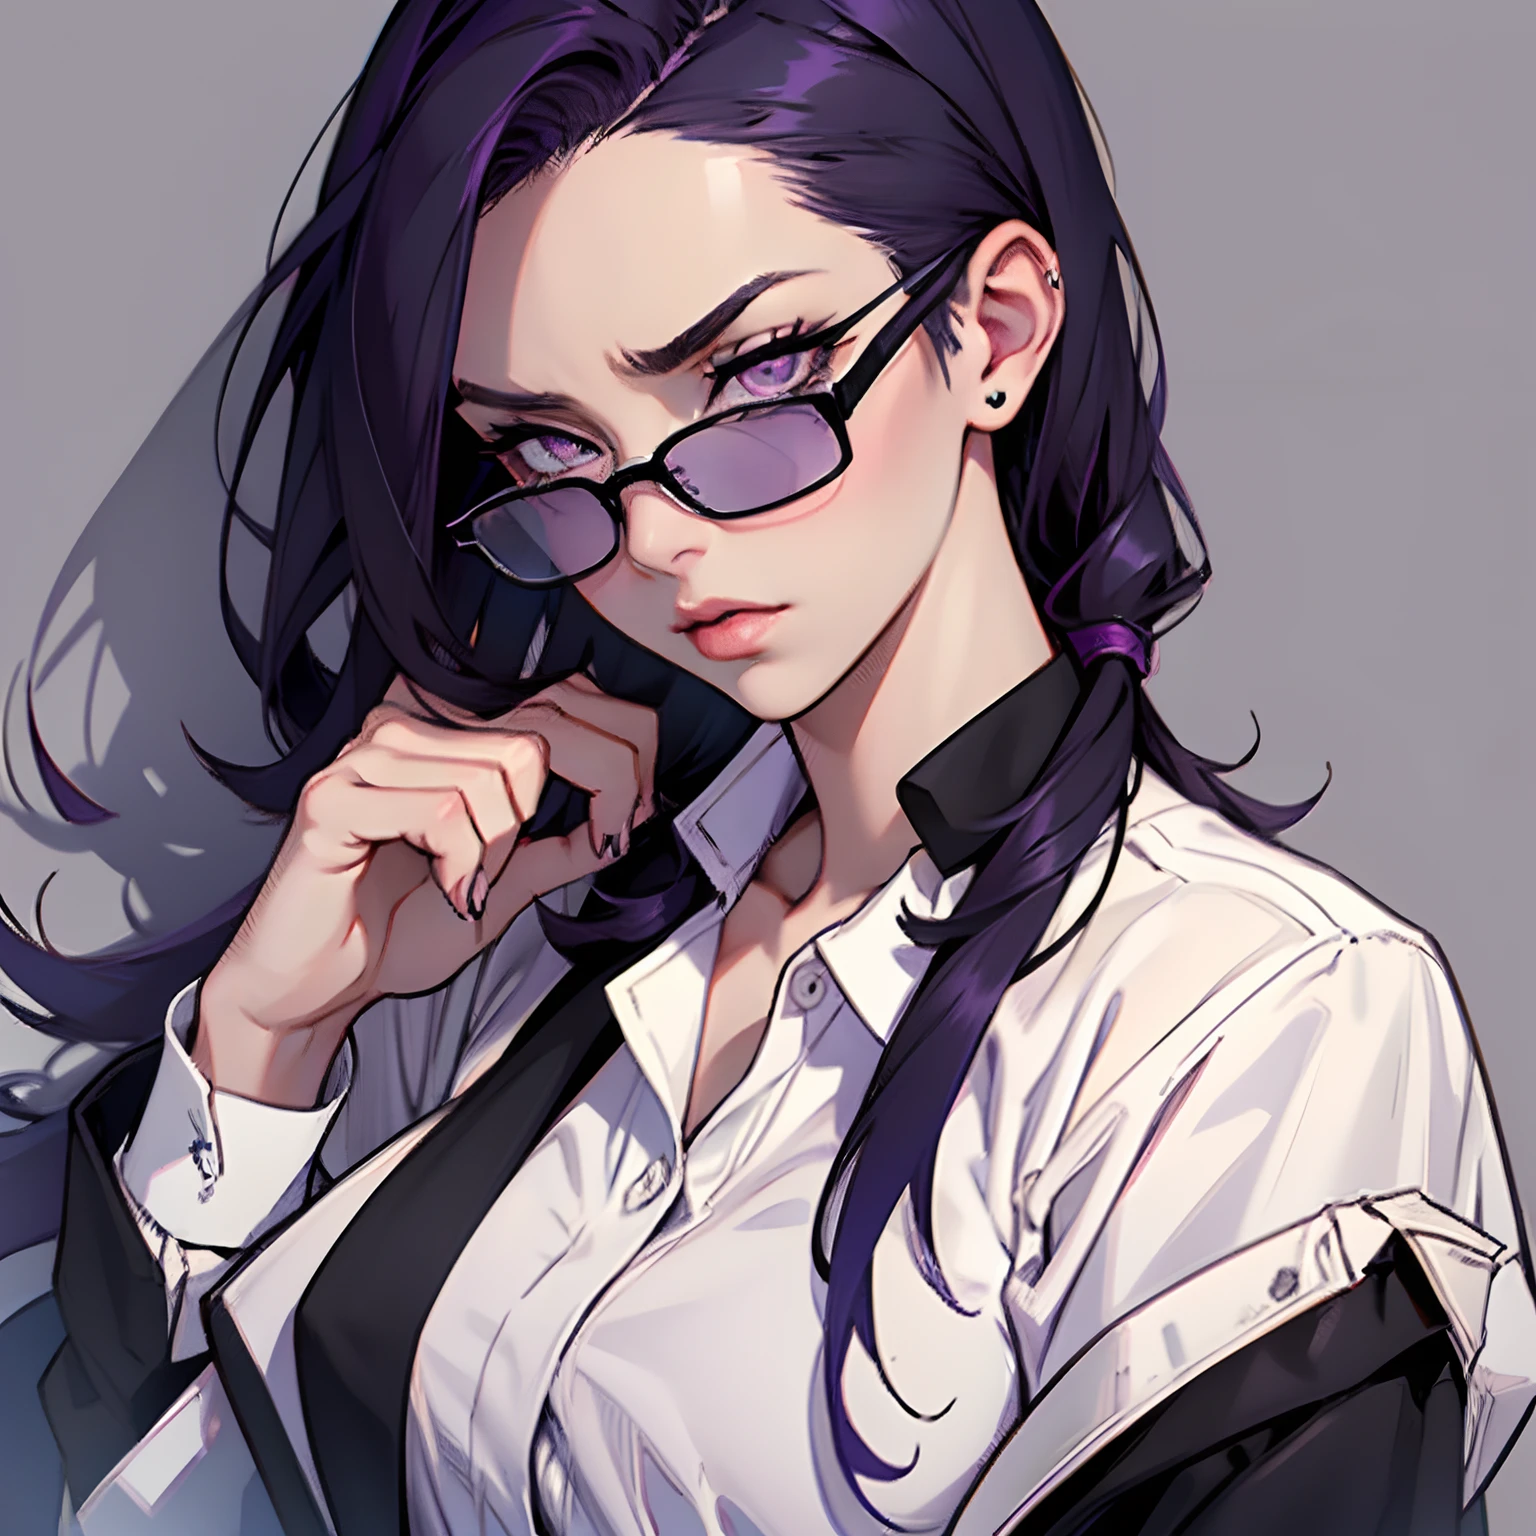 a woman, with dark purple hair, with side parted bobbed hair, wearing a square colored glasses, wearing a white shirt and black jacket, with slanted eyes, with thin eyebrows, with thin lips, sullen expression, with purple eyes, female teacher